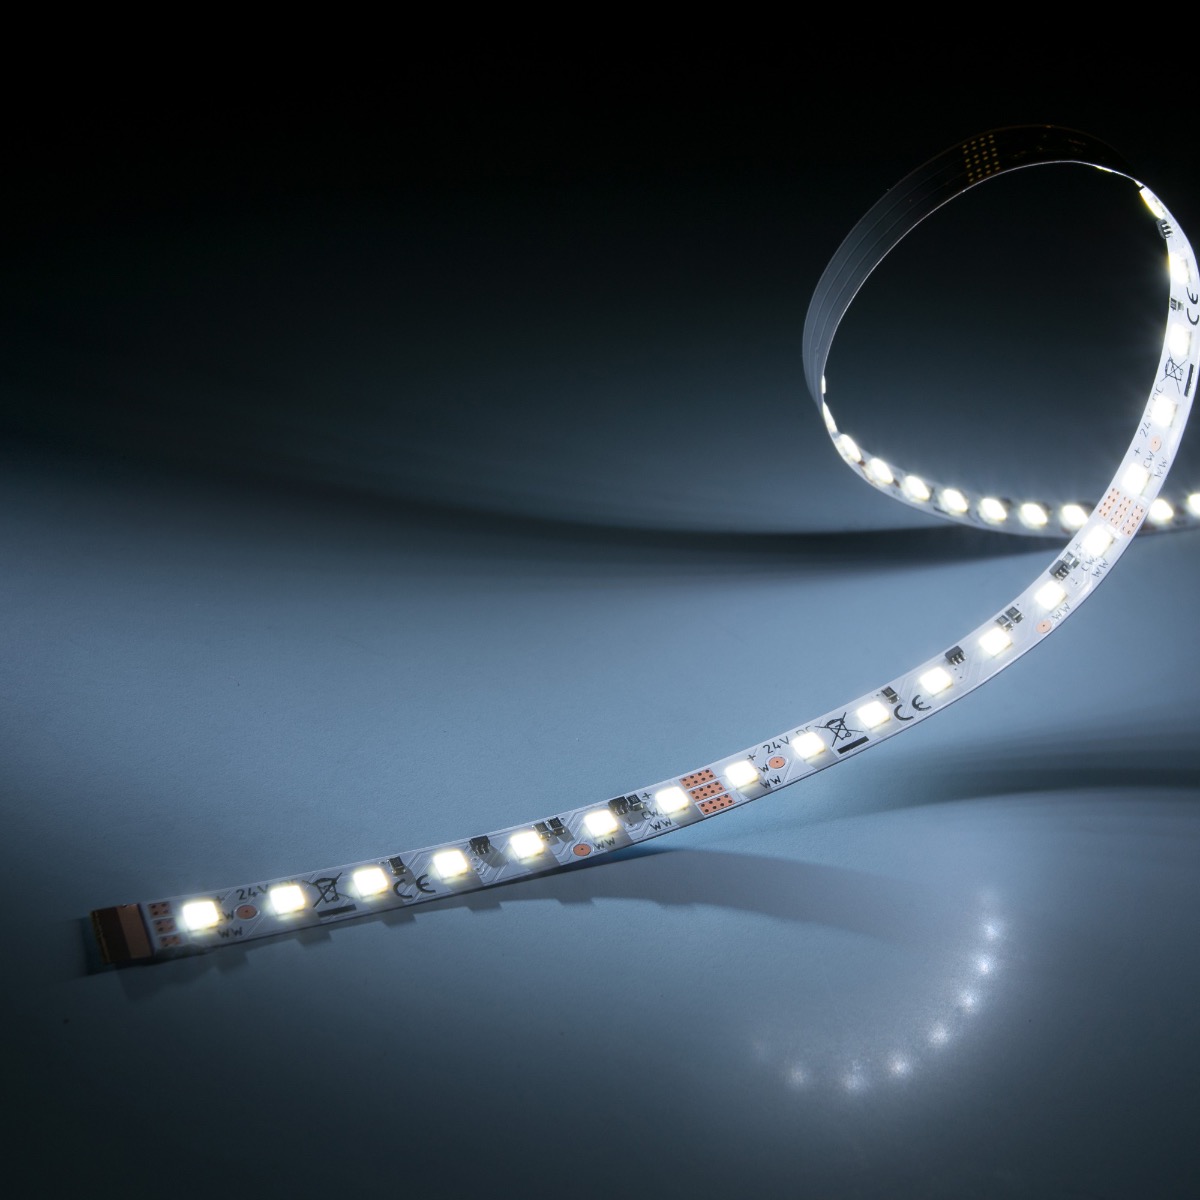 LumiFlexTW-1080 Nichia LED Strip 2 in 1 Tunable white CRI80 2700-6500K 4450lm 24V 34 LEDs/ft 5m/16ft reel (270lm/ft and 2.32W/ft) 